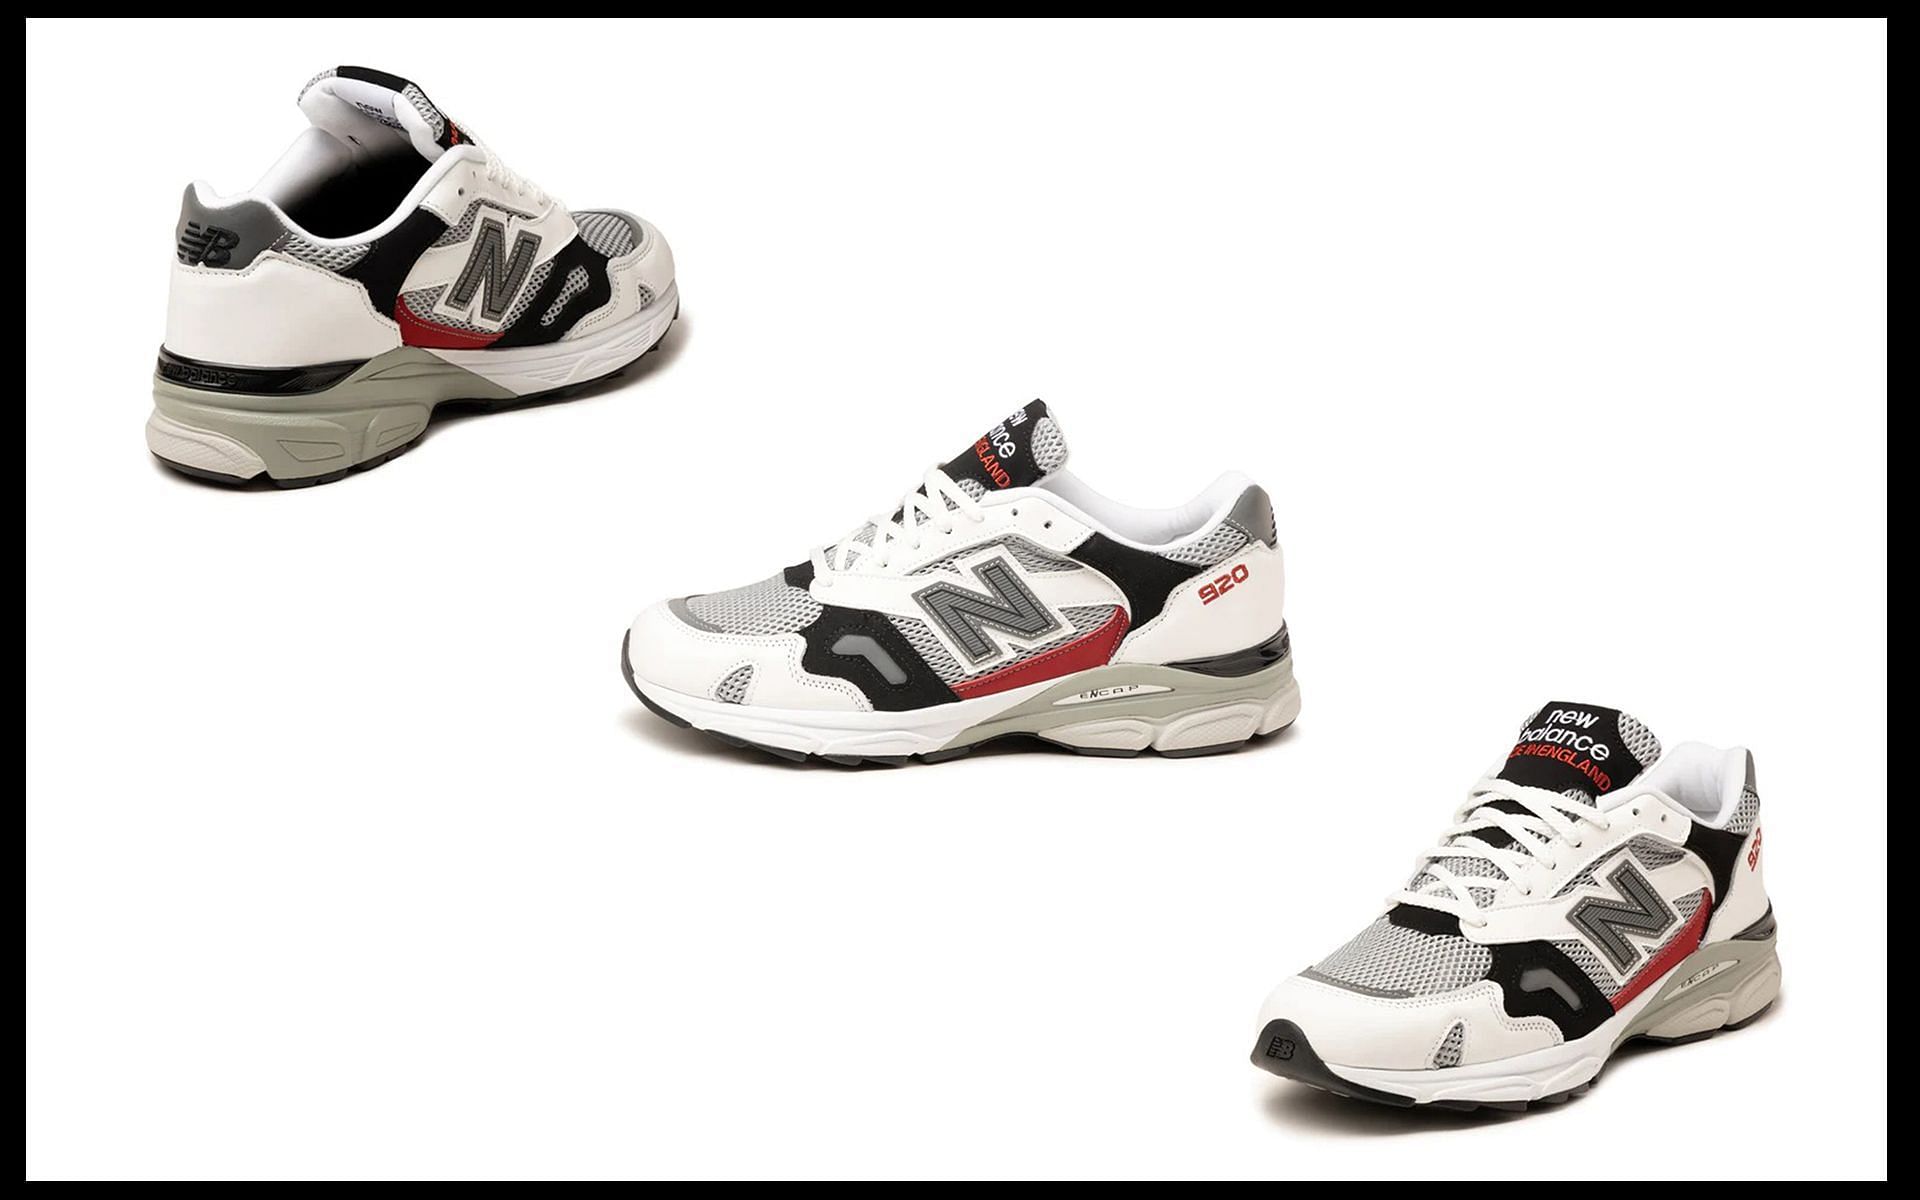 Take a look at the arriving New Balance 920 Made in UK shoes (Image via Sportskeeda)